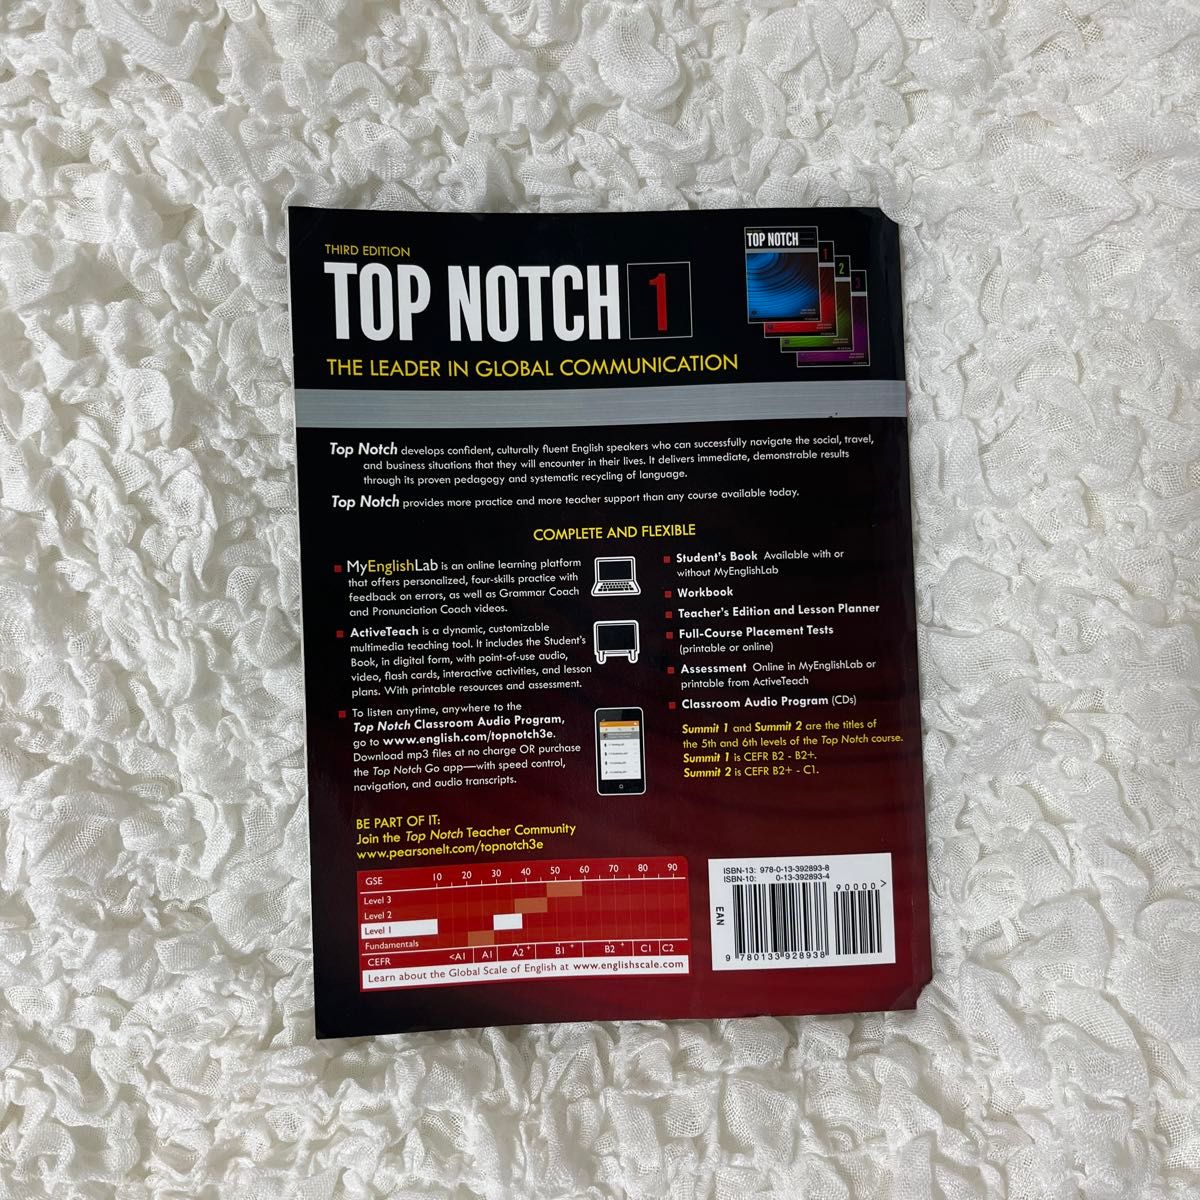 THIRD EDITION TOP NOTCH 1 the leader in global communication 